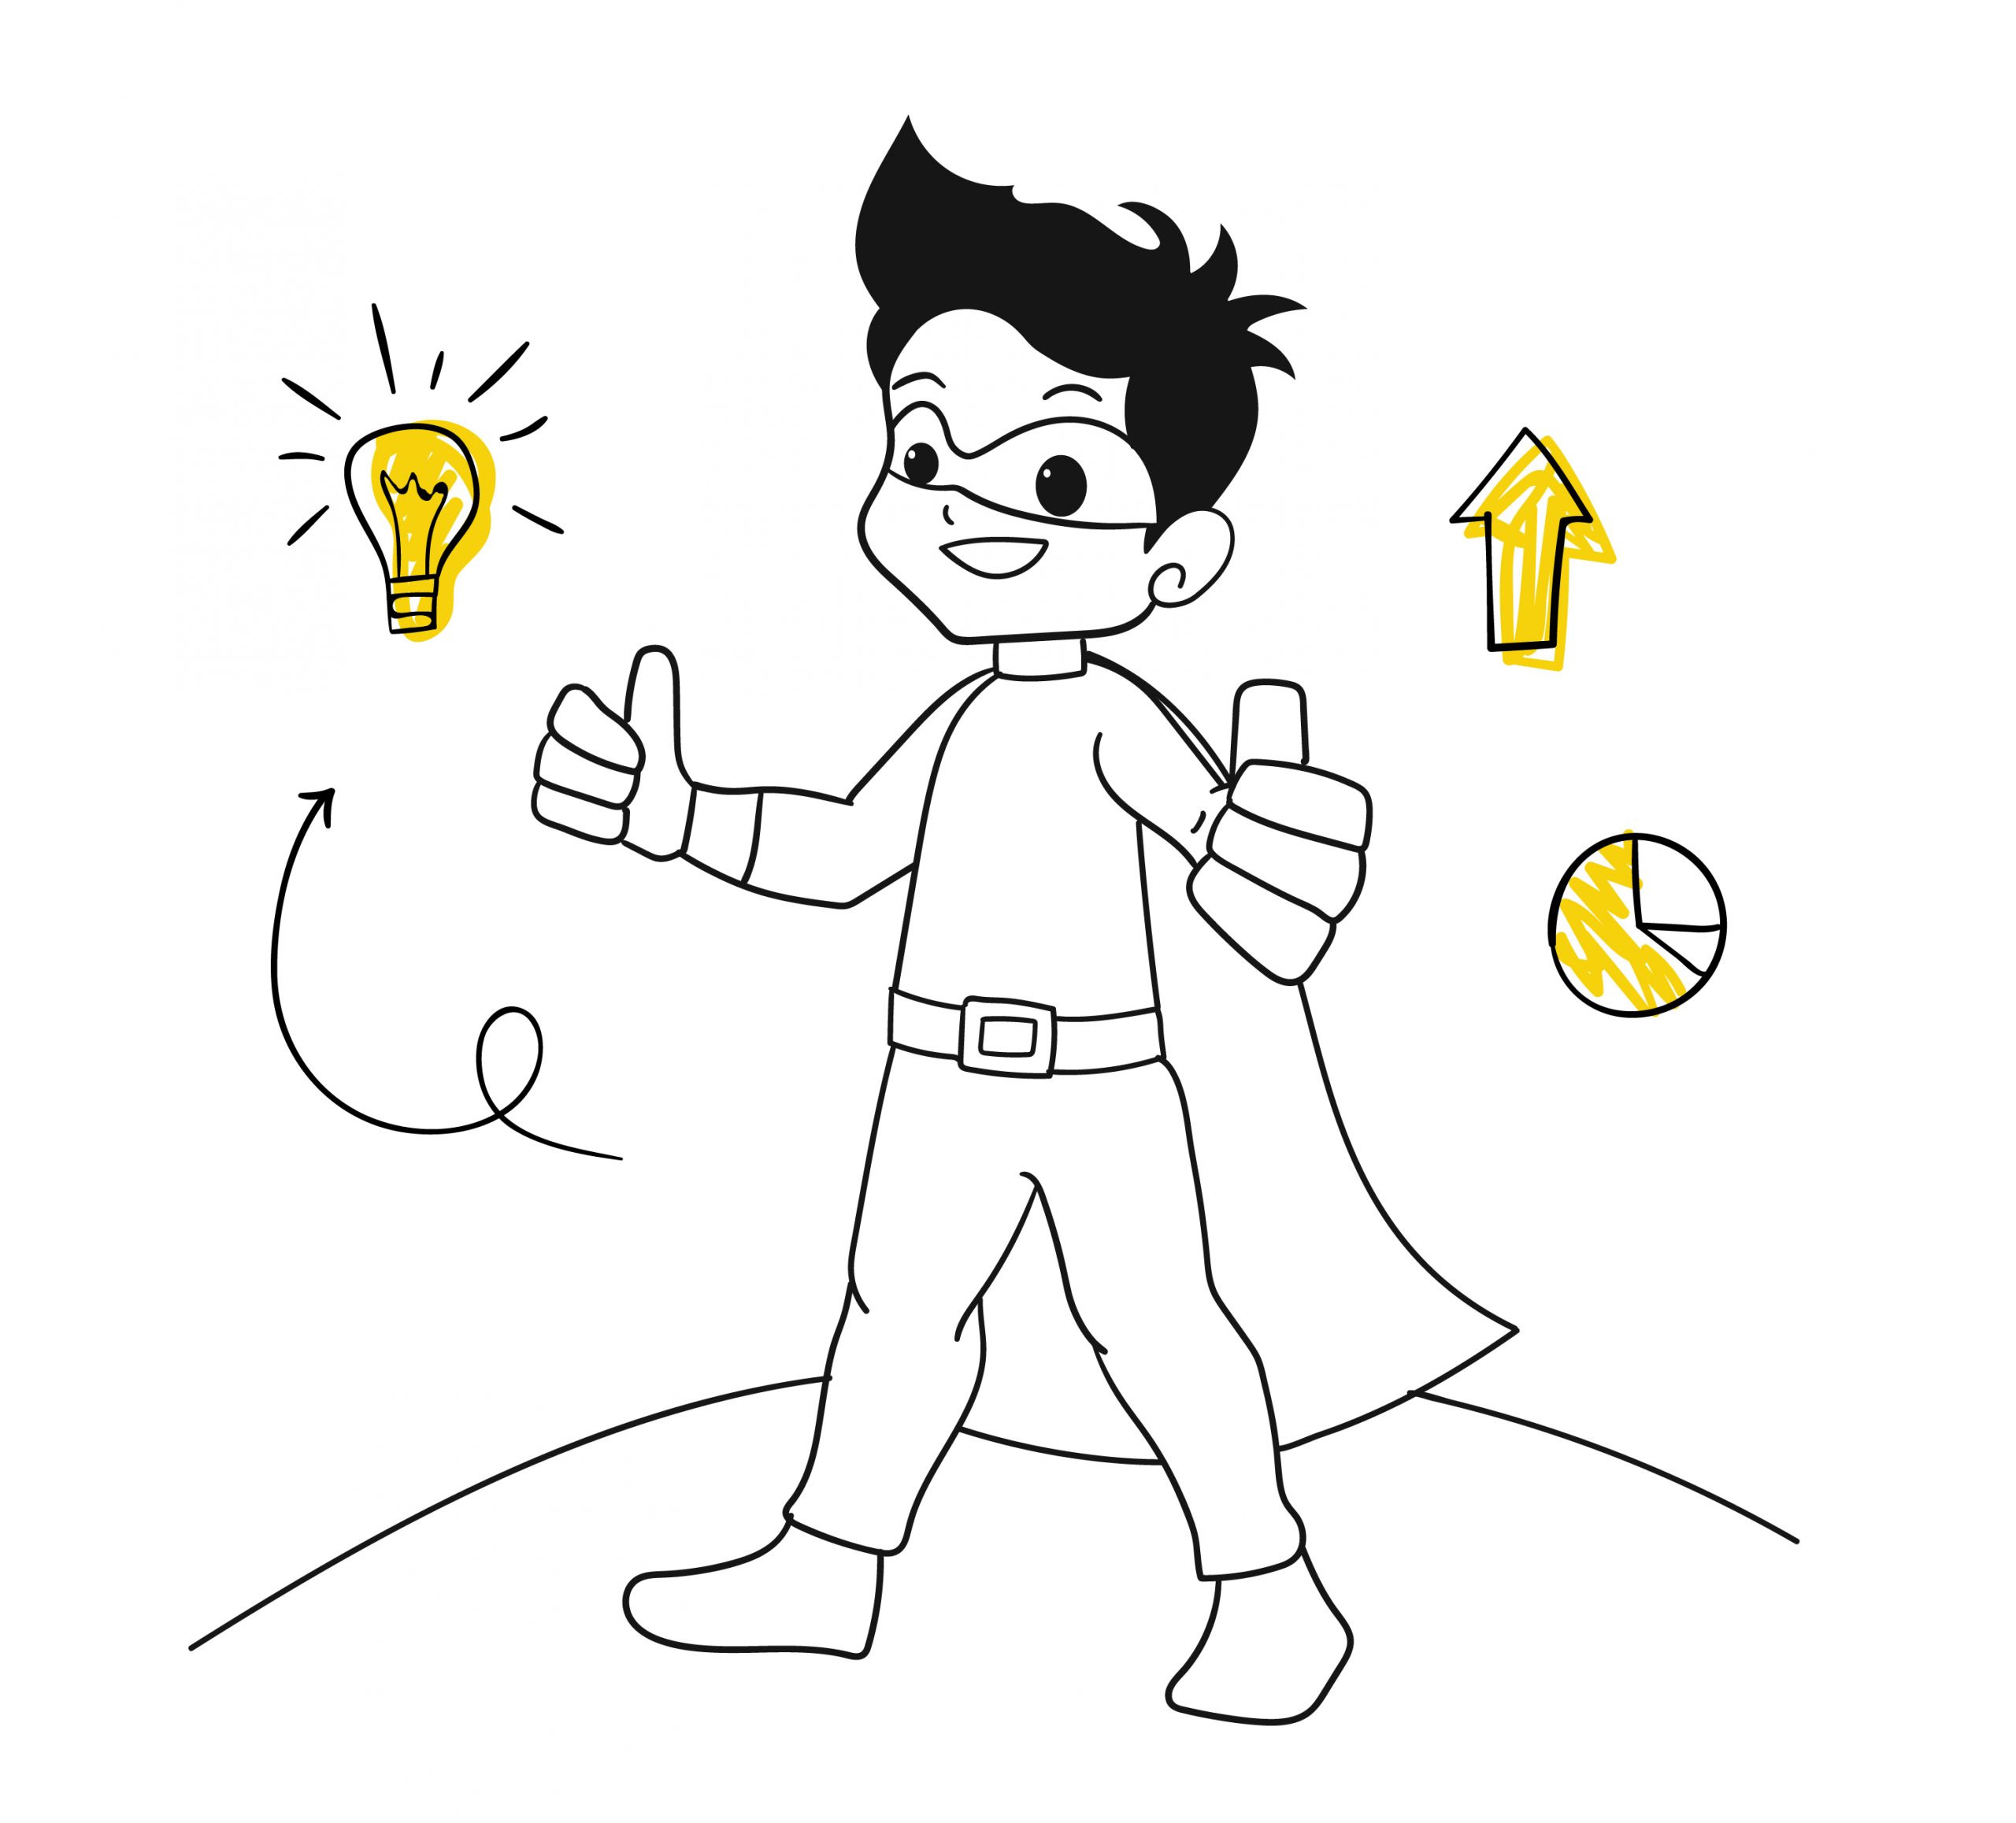 A cartoon boy in a superhero costume, with a background featuring a bulb arrow and graph.